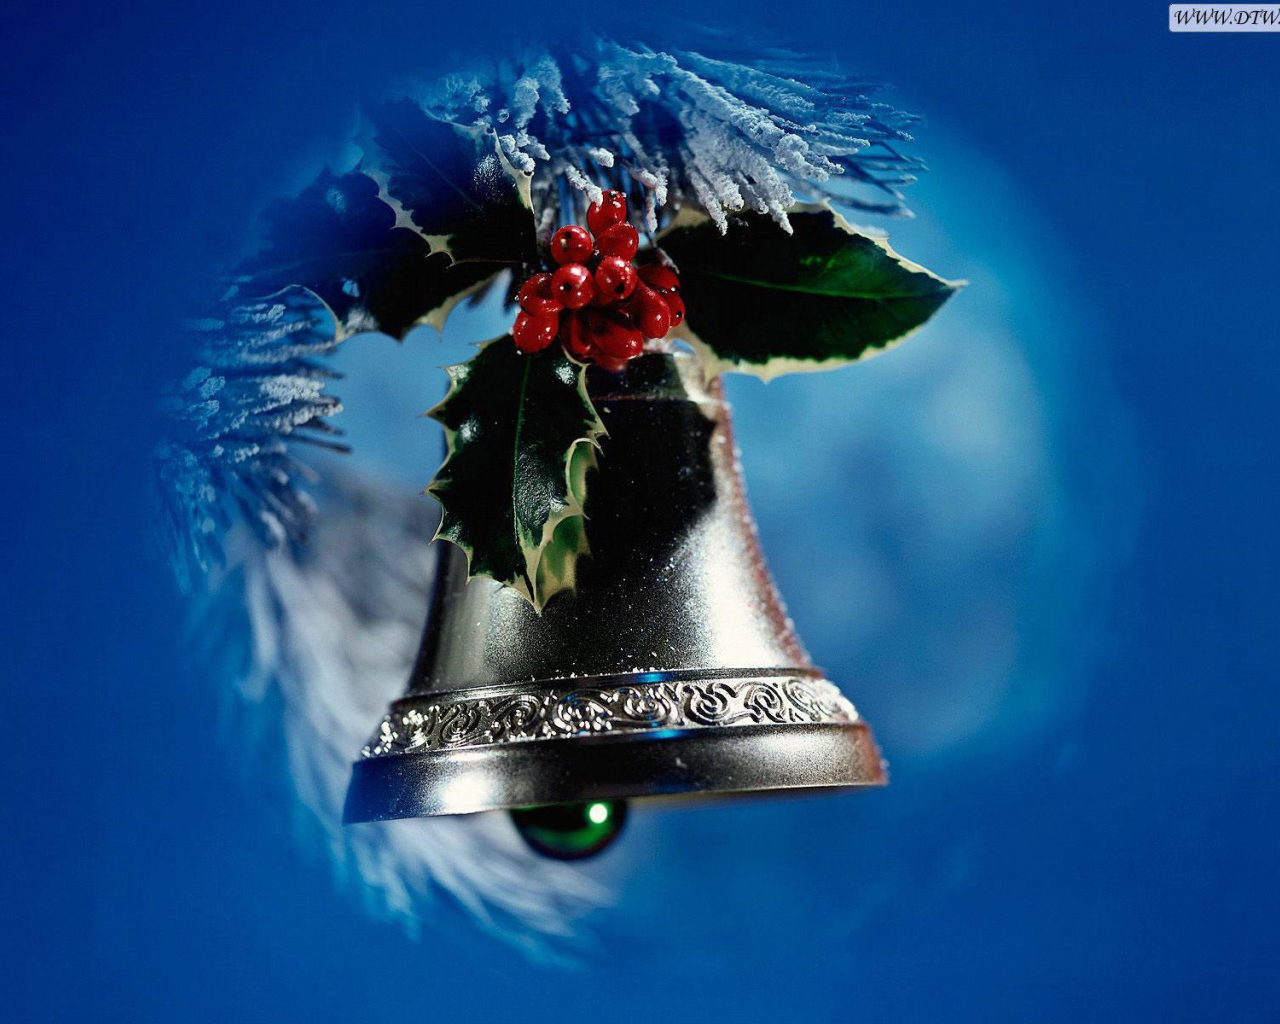 Bell on blue background on Christmas